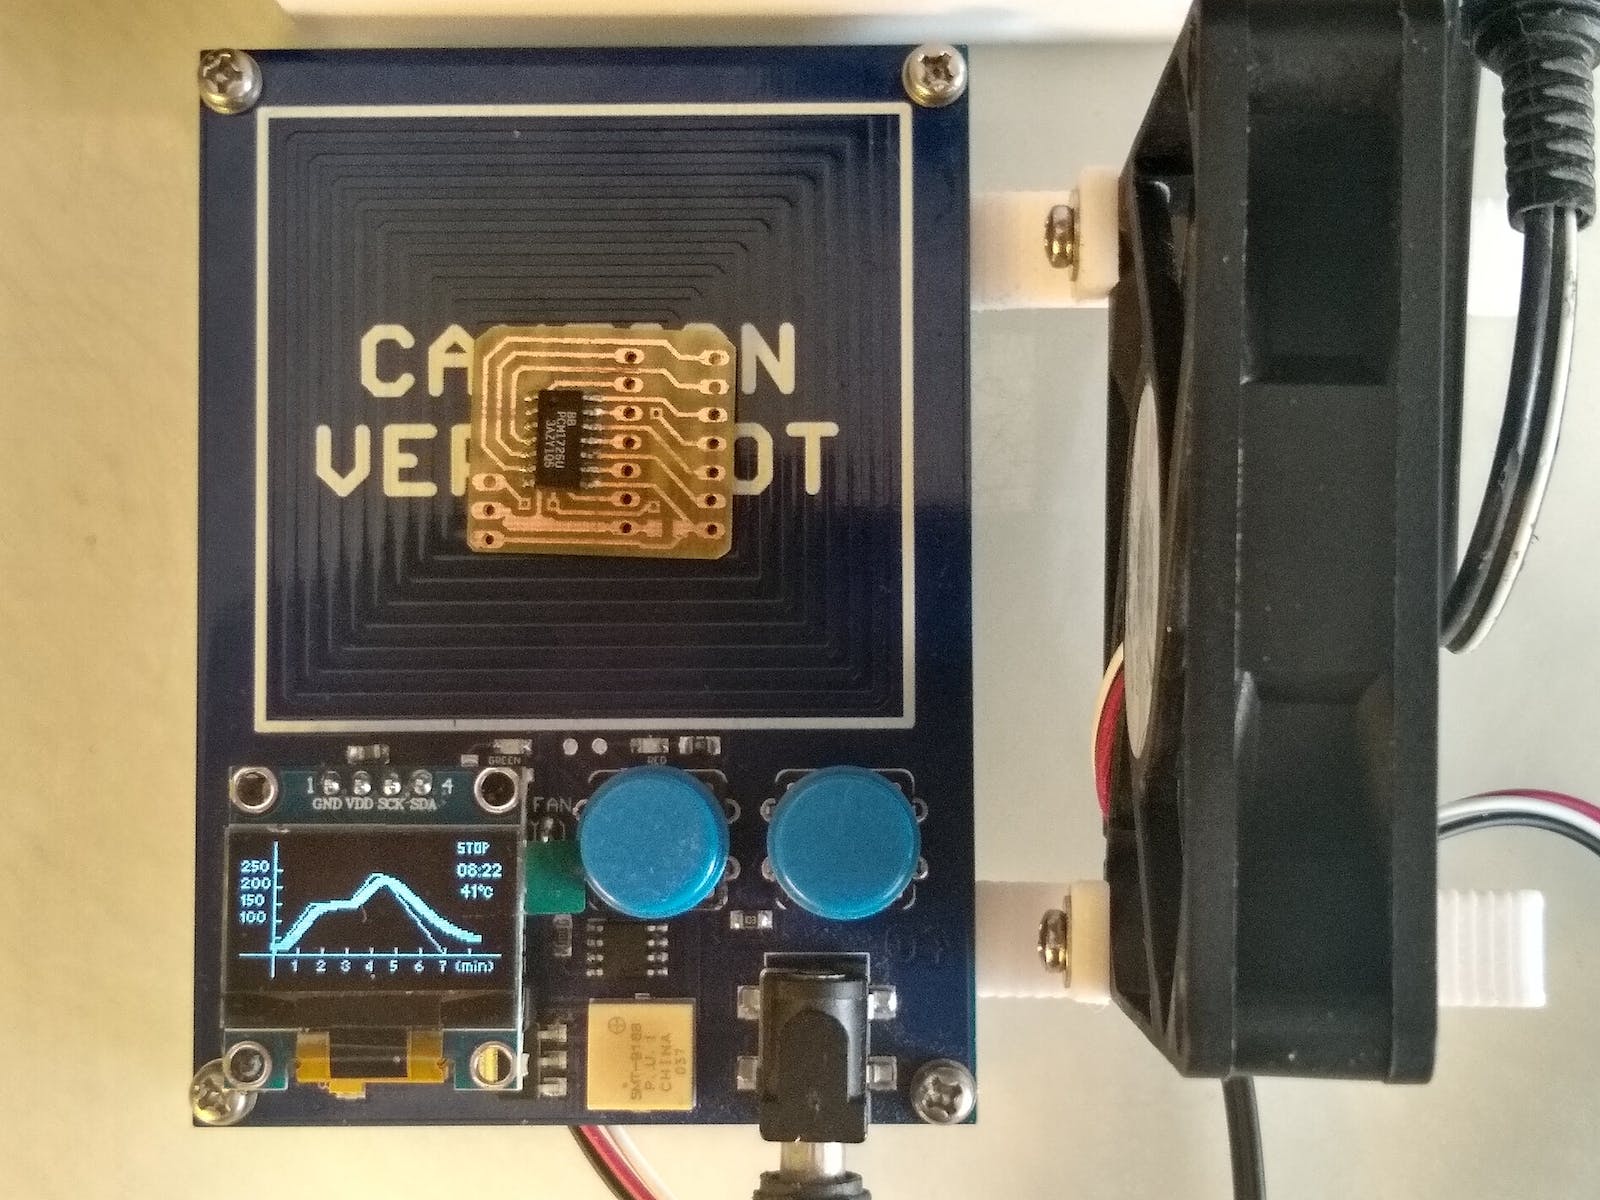 Internal Heating Element Makes These PCBs Self-Soldering